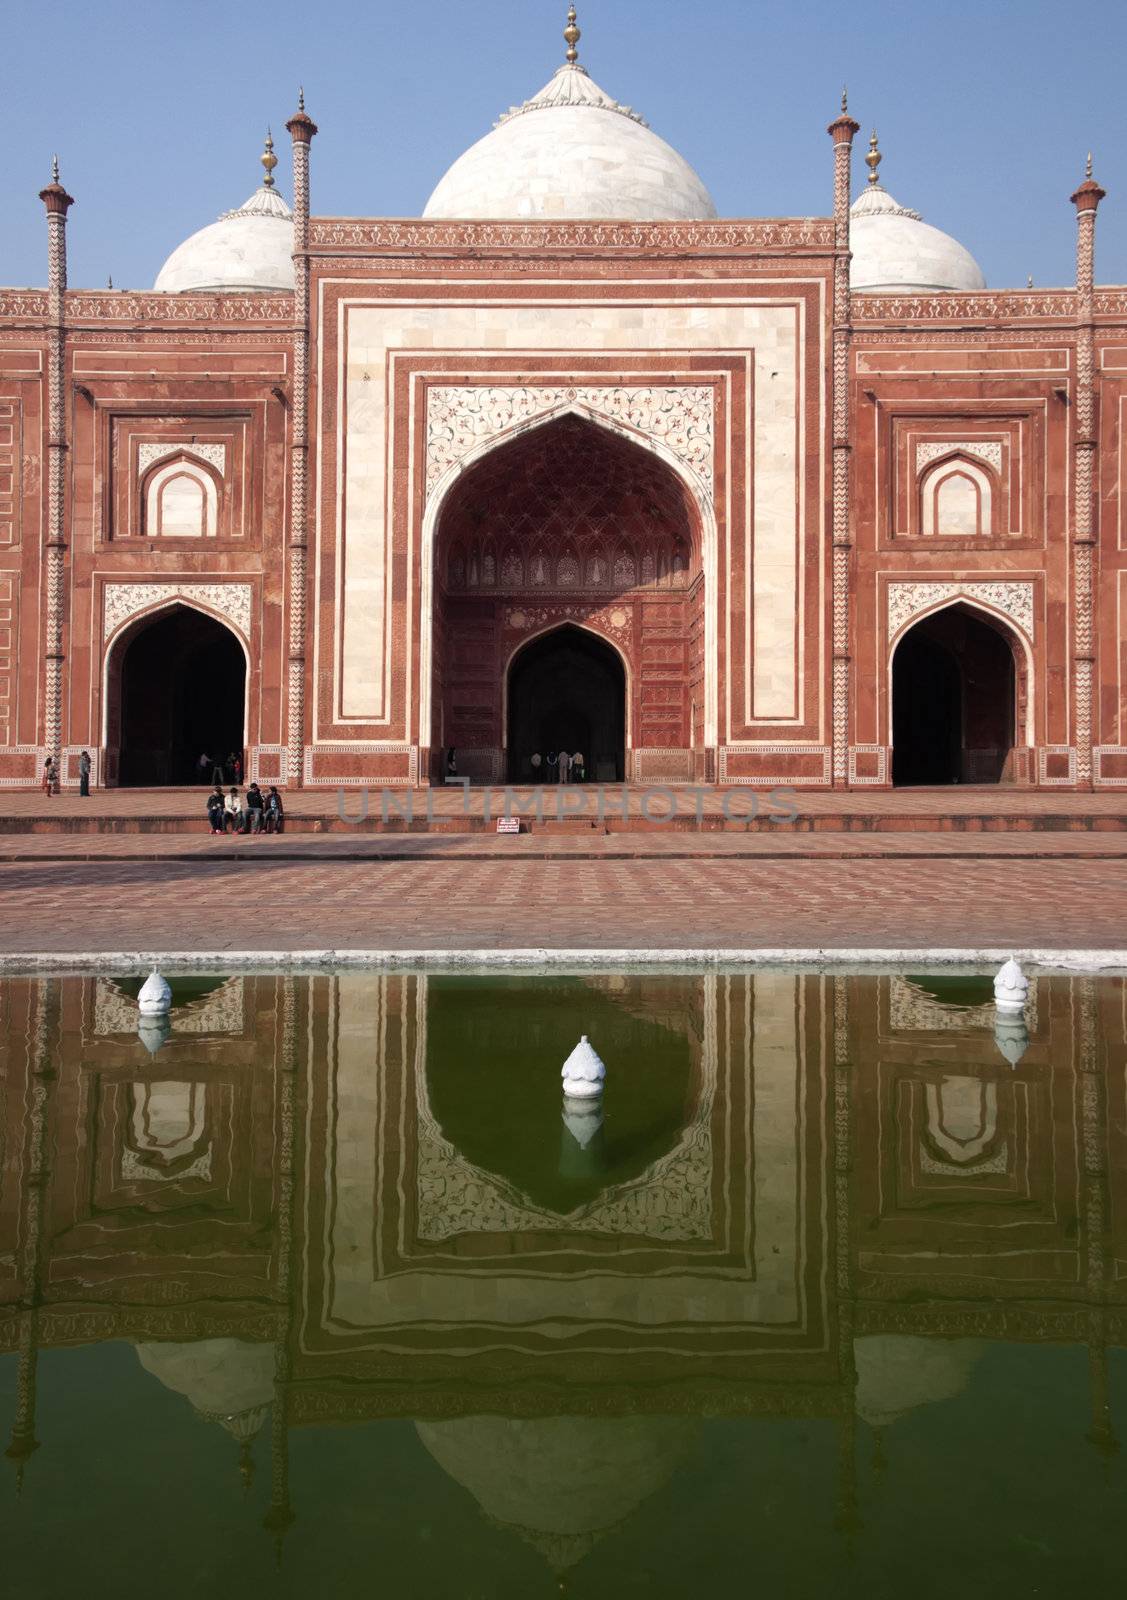 Green water mirrors red sandstone mosque with white domes and decorations.